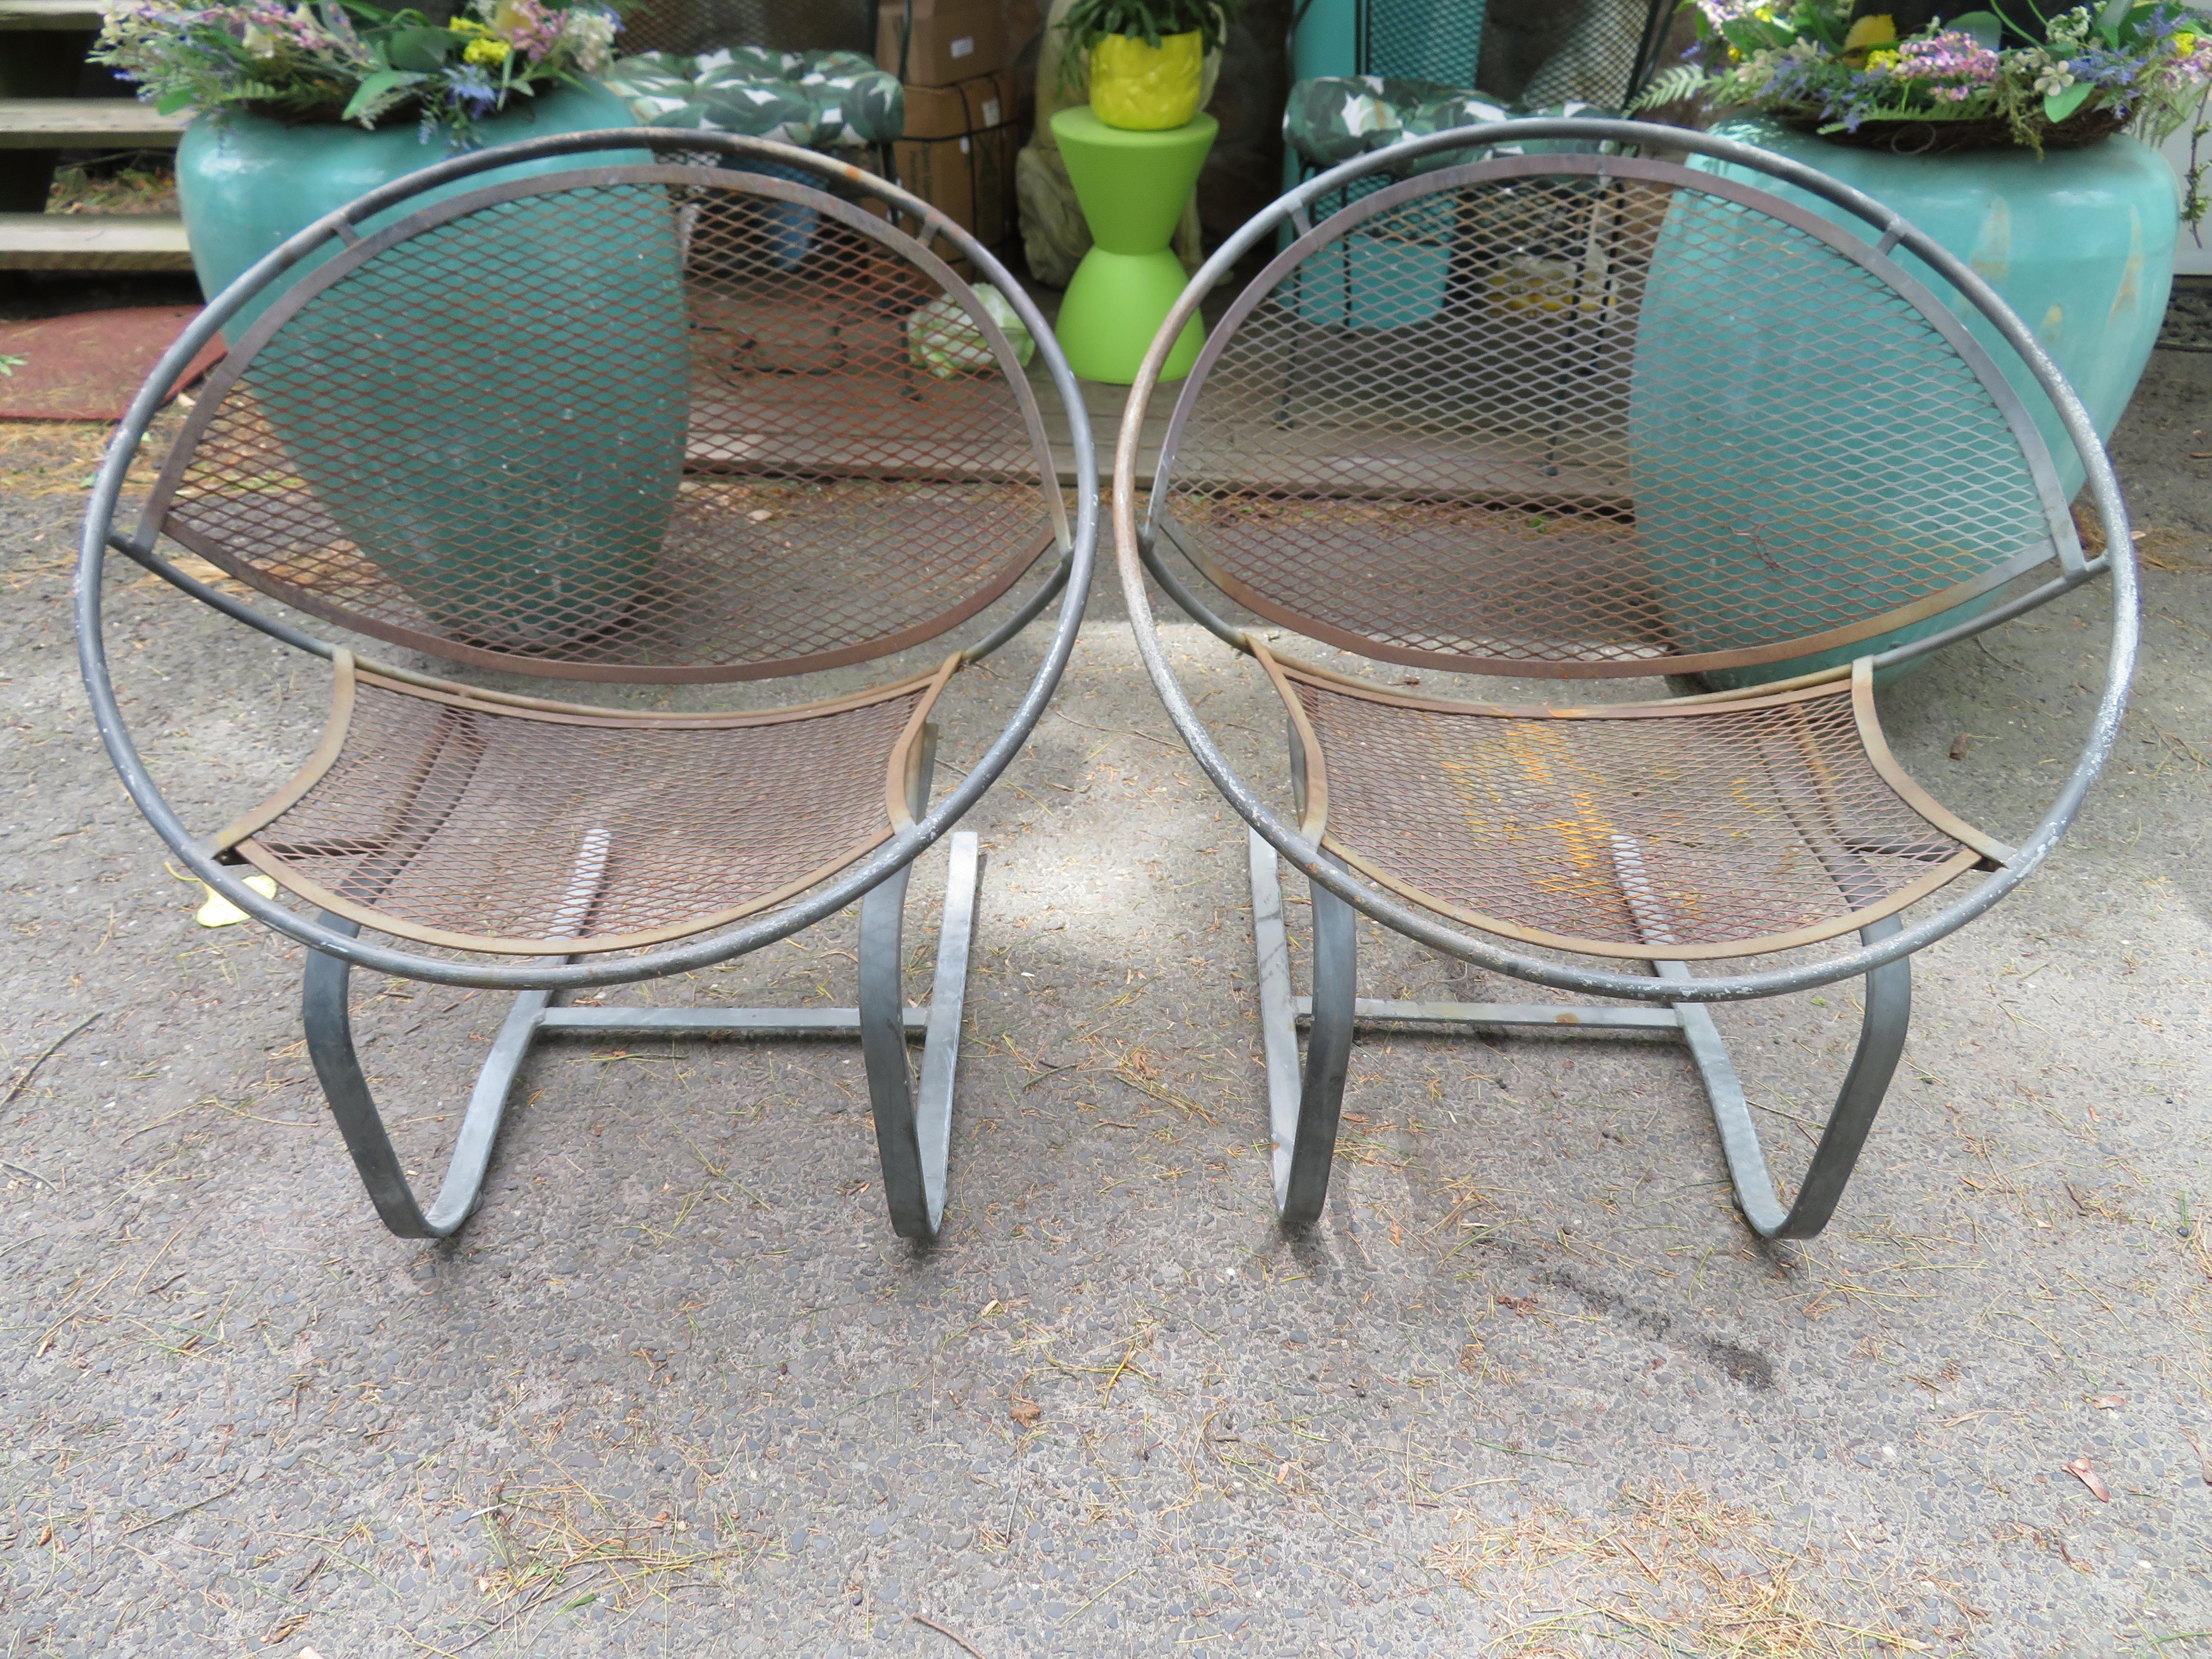 Lovely pair of springer radar chairs for Salterini designed by Maurizio Tempestini. Spring action, round saucer like frame, with mesh metal backing. These chairs measure 32